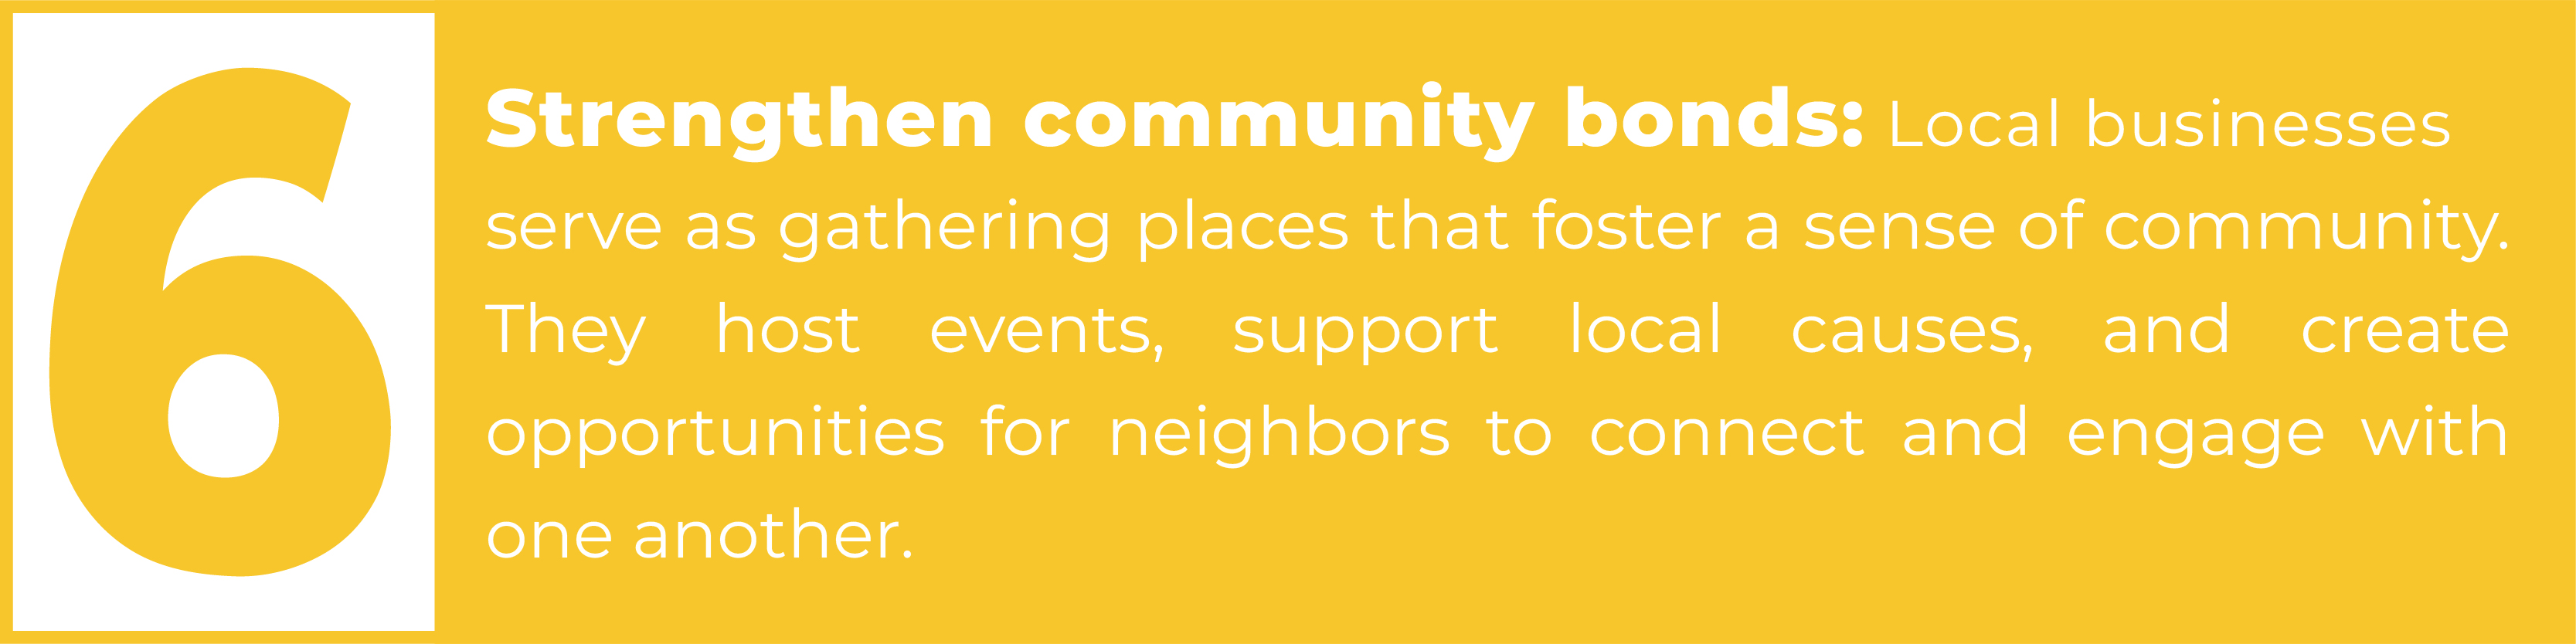 6. Strengthen community bonds: Local businesses serve as gathering places that foster a sense of community. They host events, support local causes, and create opportunities for neighbors to connect and engage with one another. 